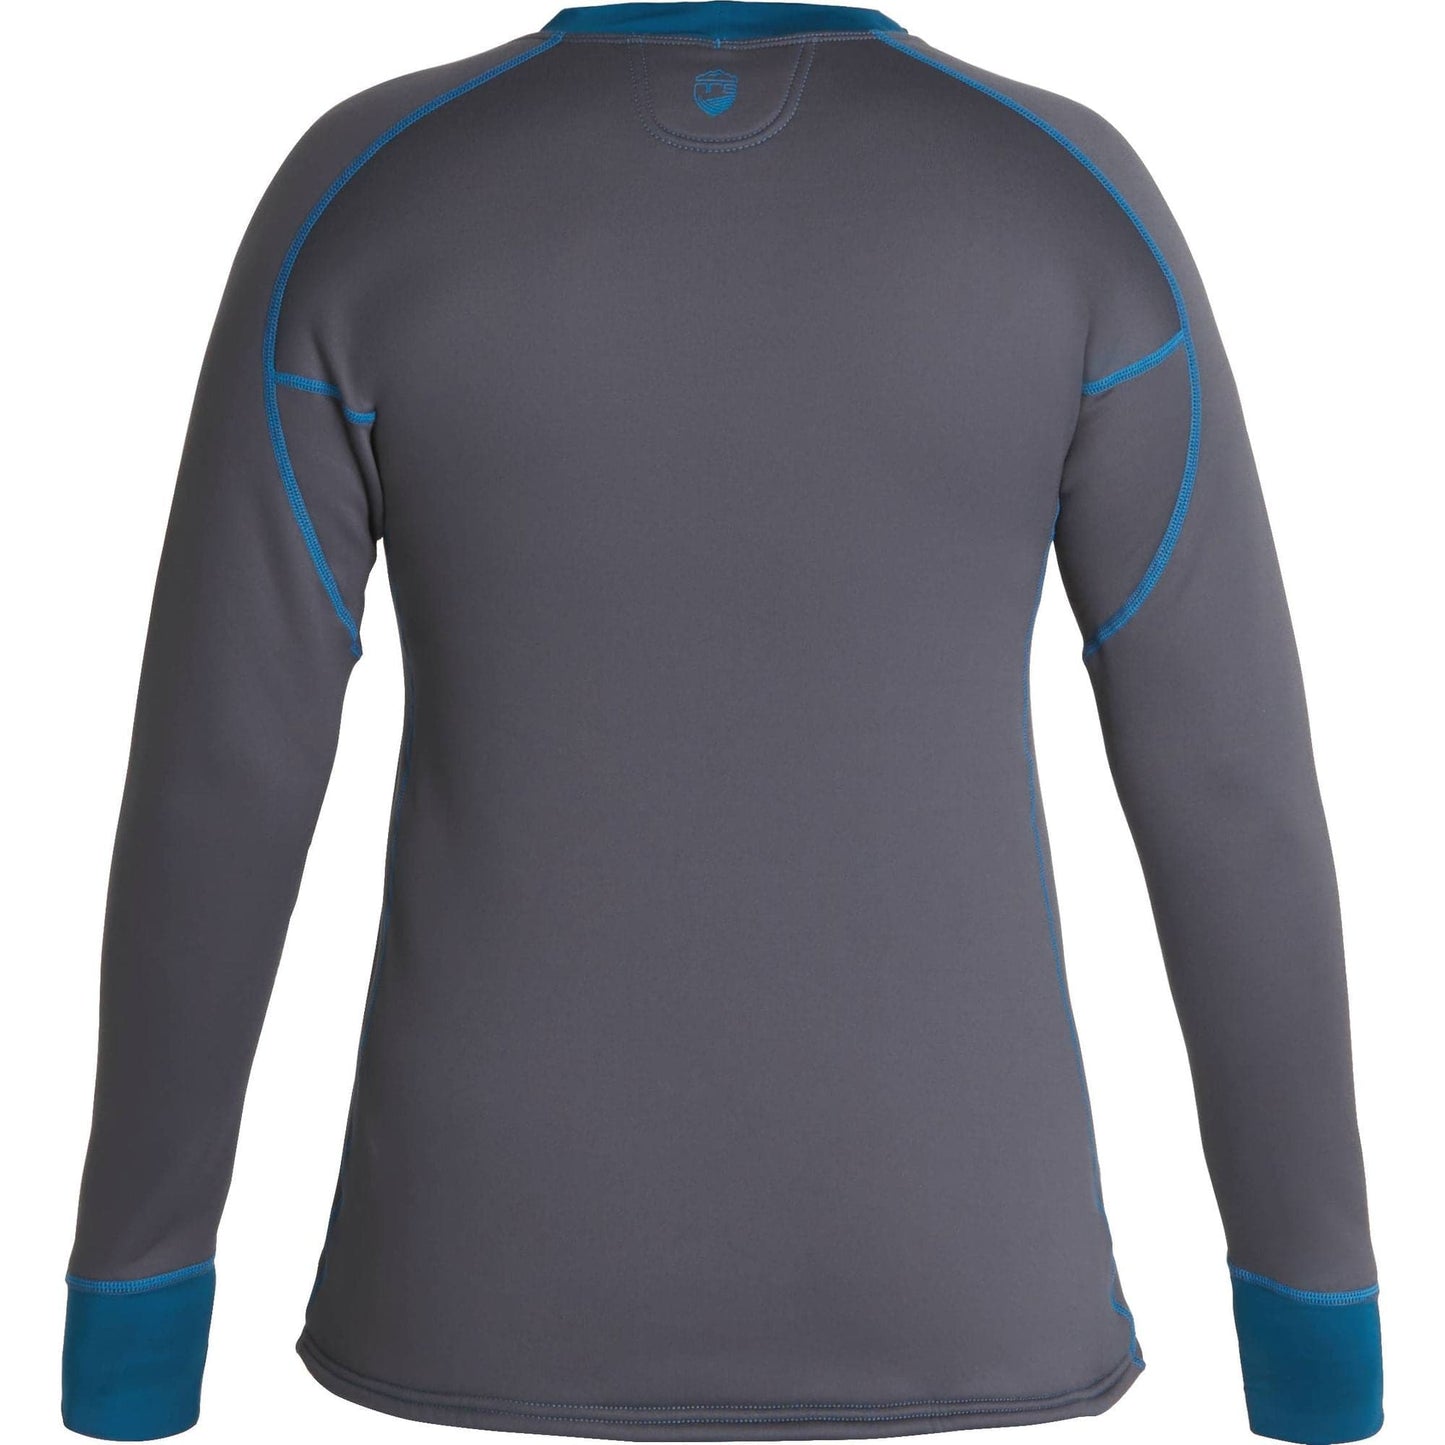 The back view of a women's long-sleeved shirt, crafted with NRS Expedition Fleece - Women's for optimal warmth and comfort.